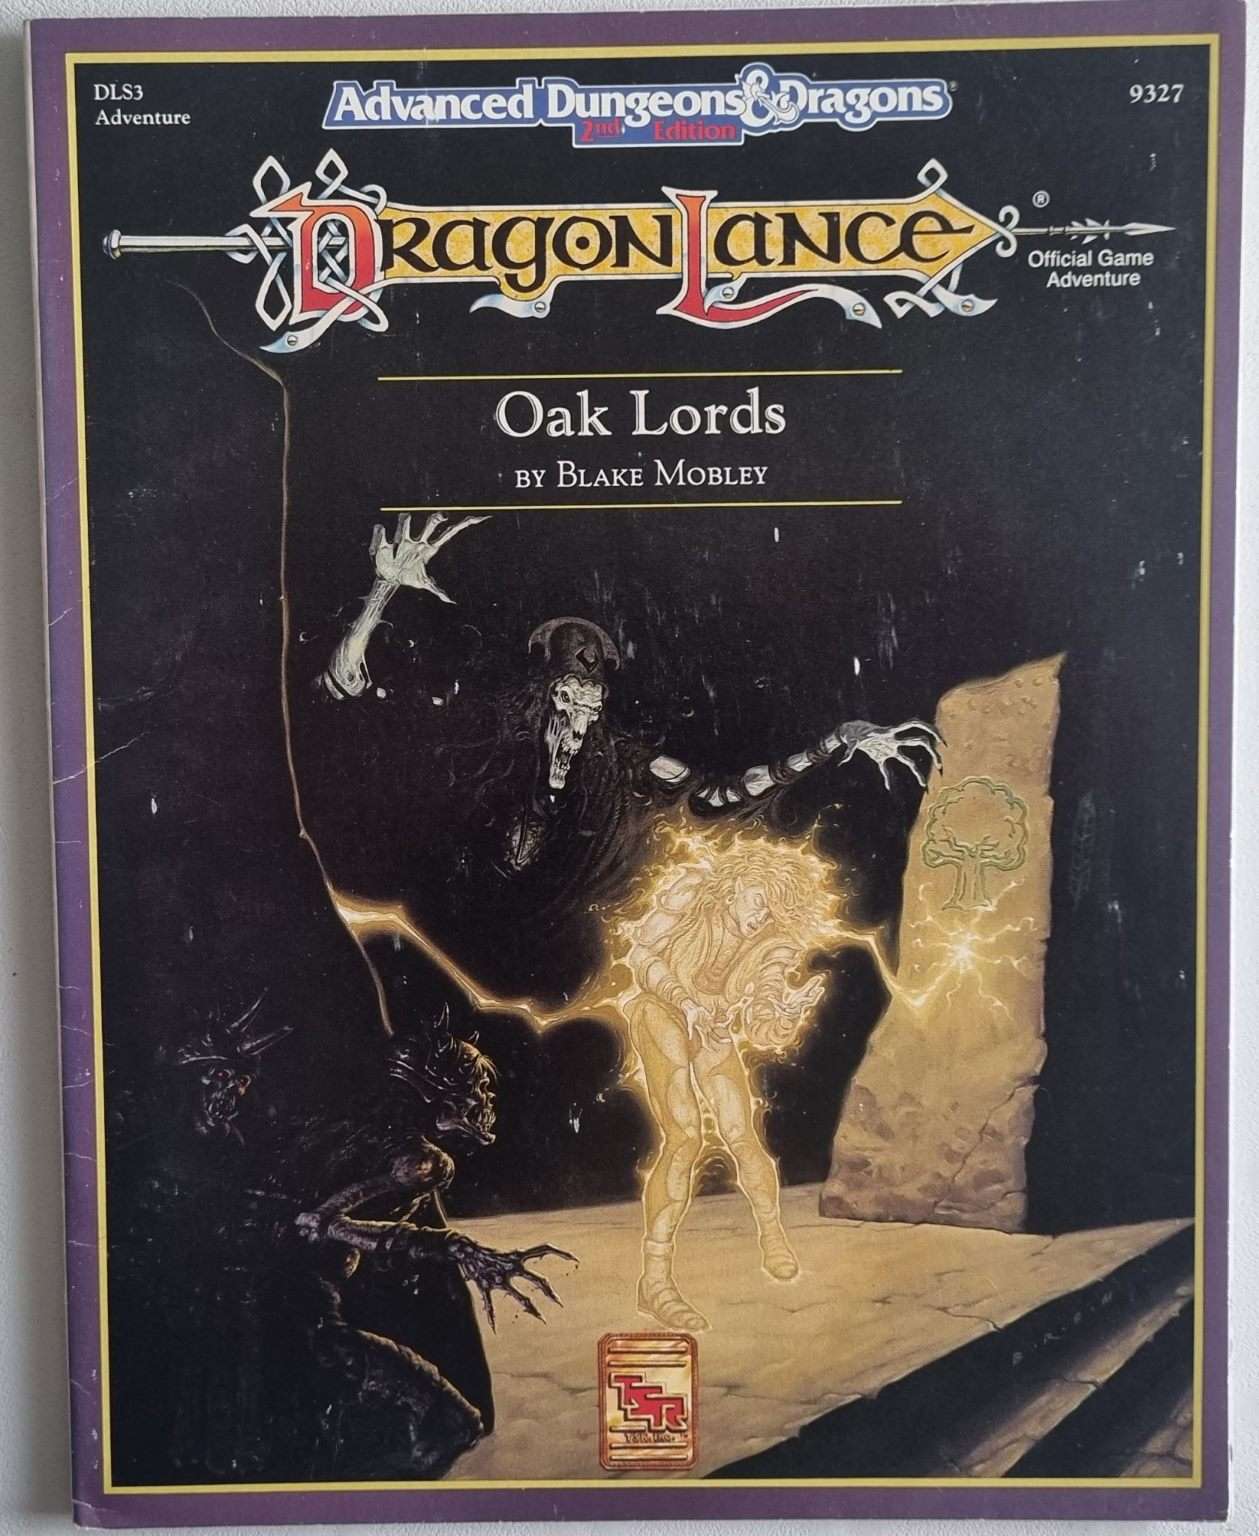 Advanced Dungeons and Dragons - Dragonlance - Oak Lords (DLS3 9327) Default Title